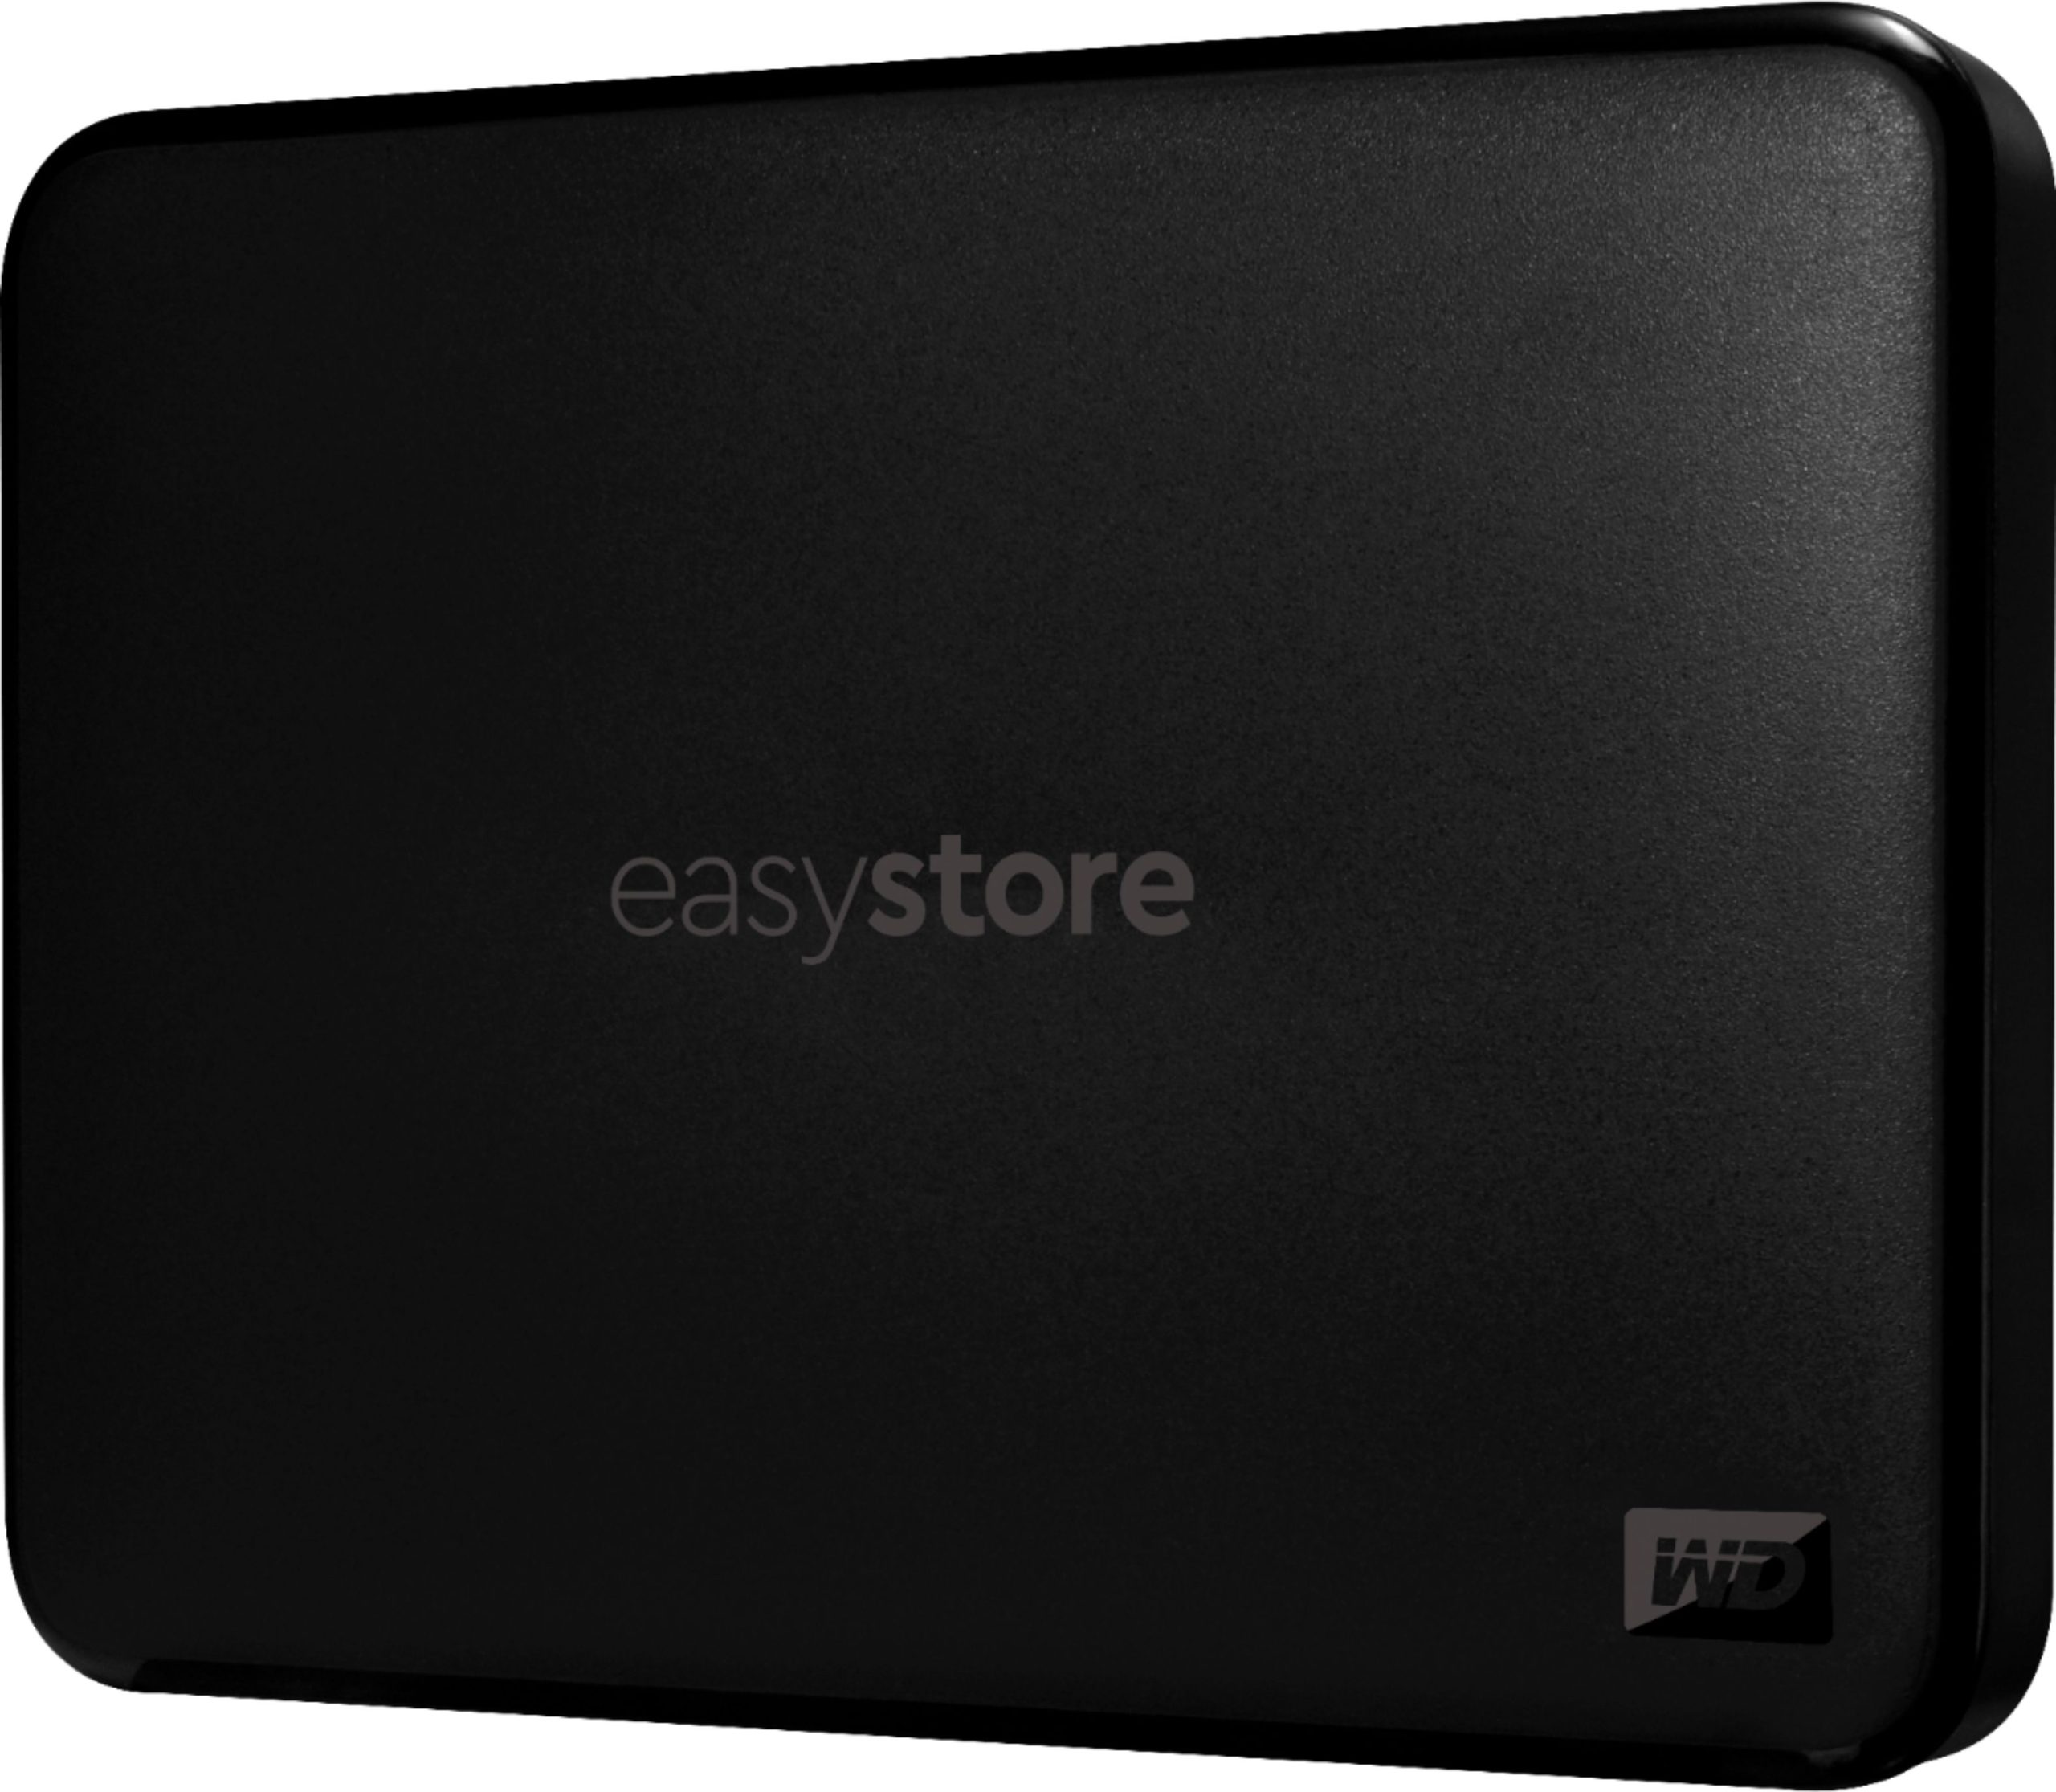 WD – Easystore 2TB External USB 3.0 Portable Hard Drive – Black – Just $69.99 at Best Buy